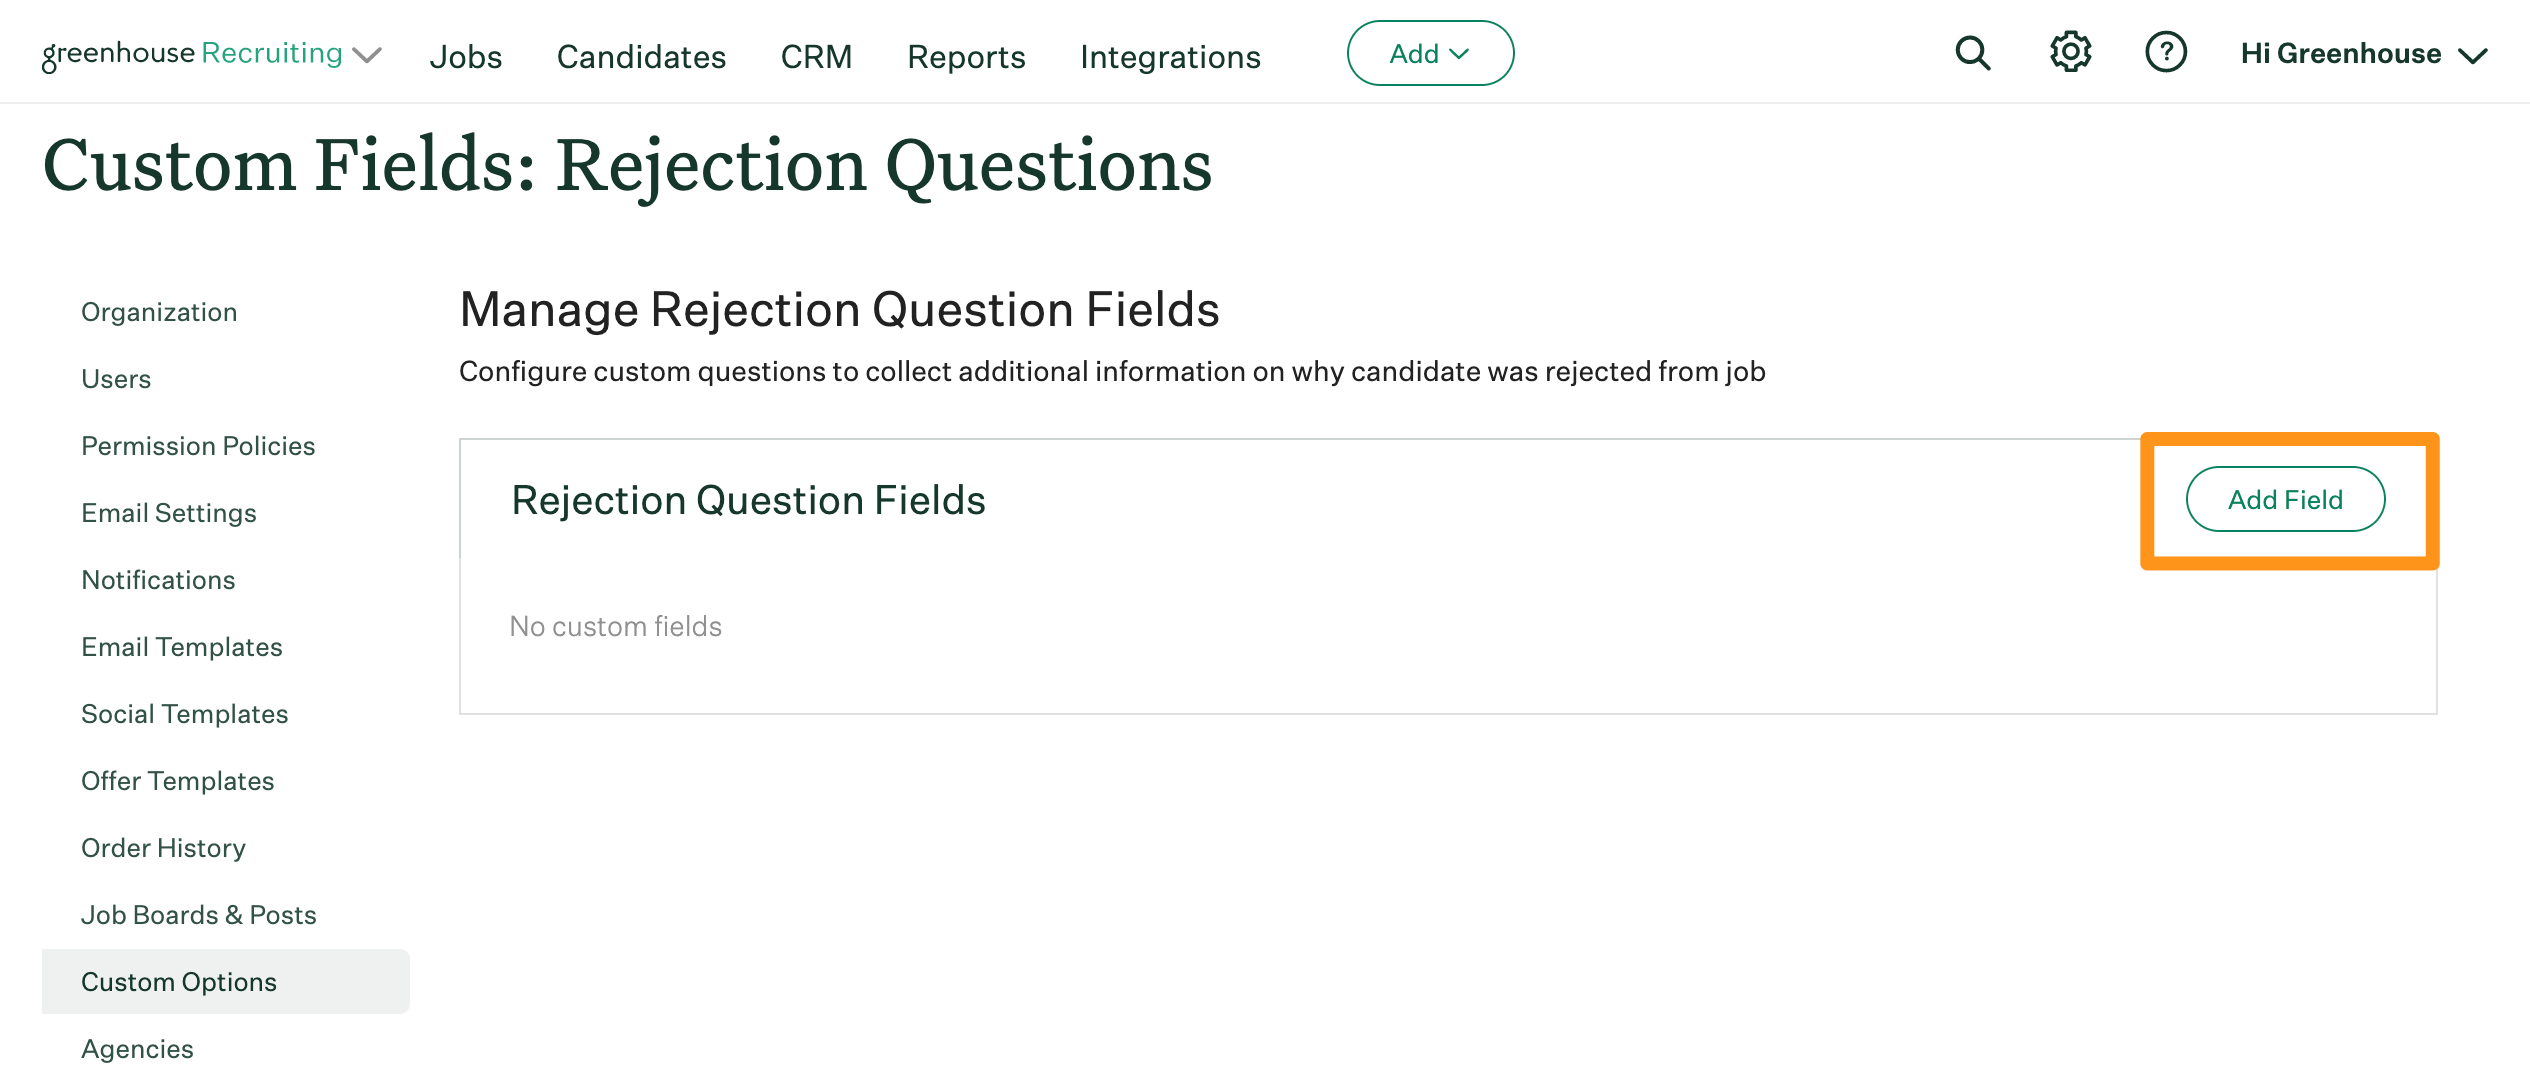 Screenshot of Add field button on rejection questions page